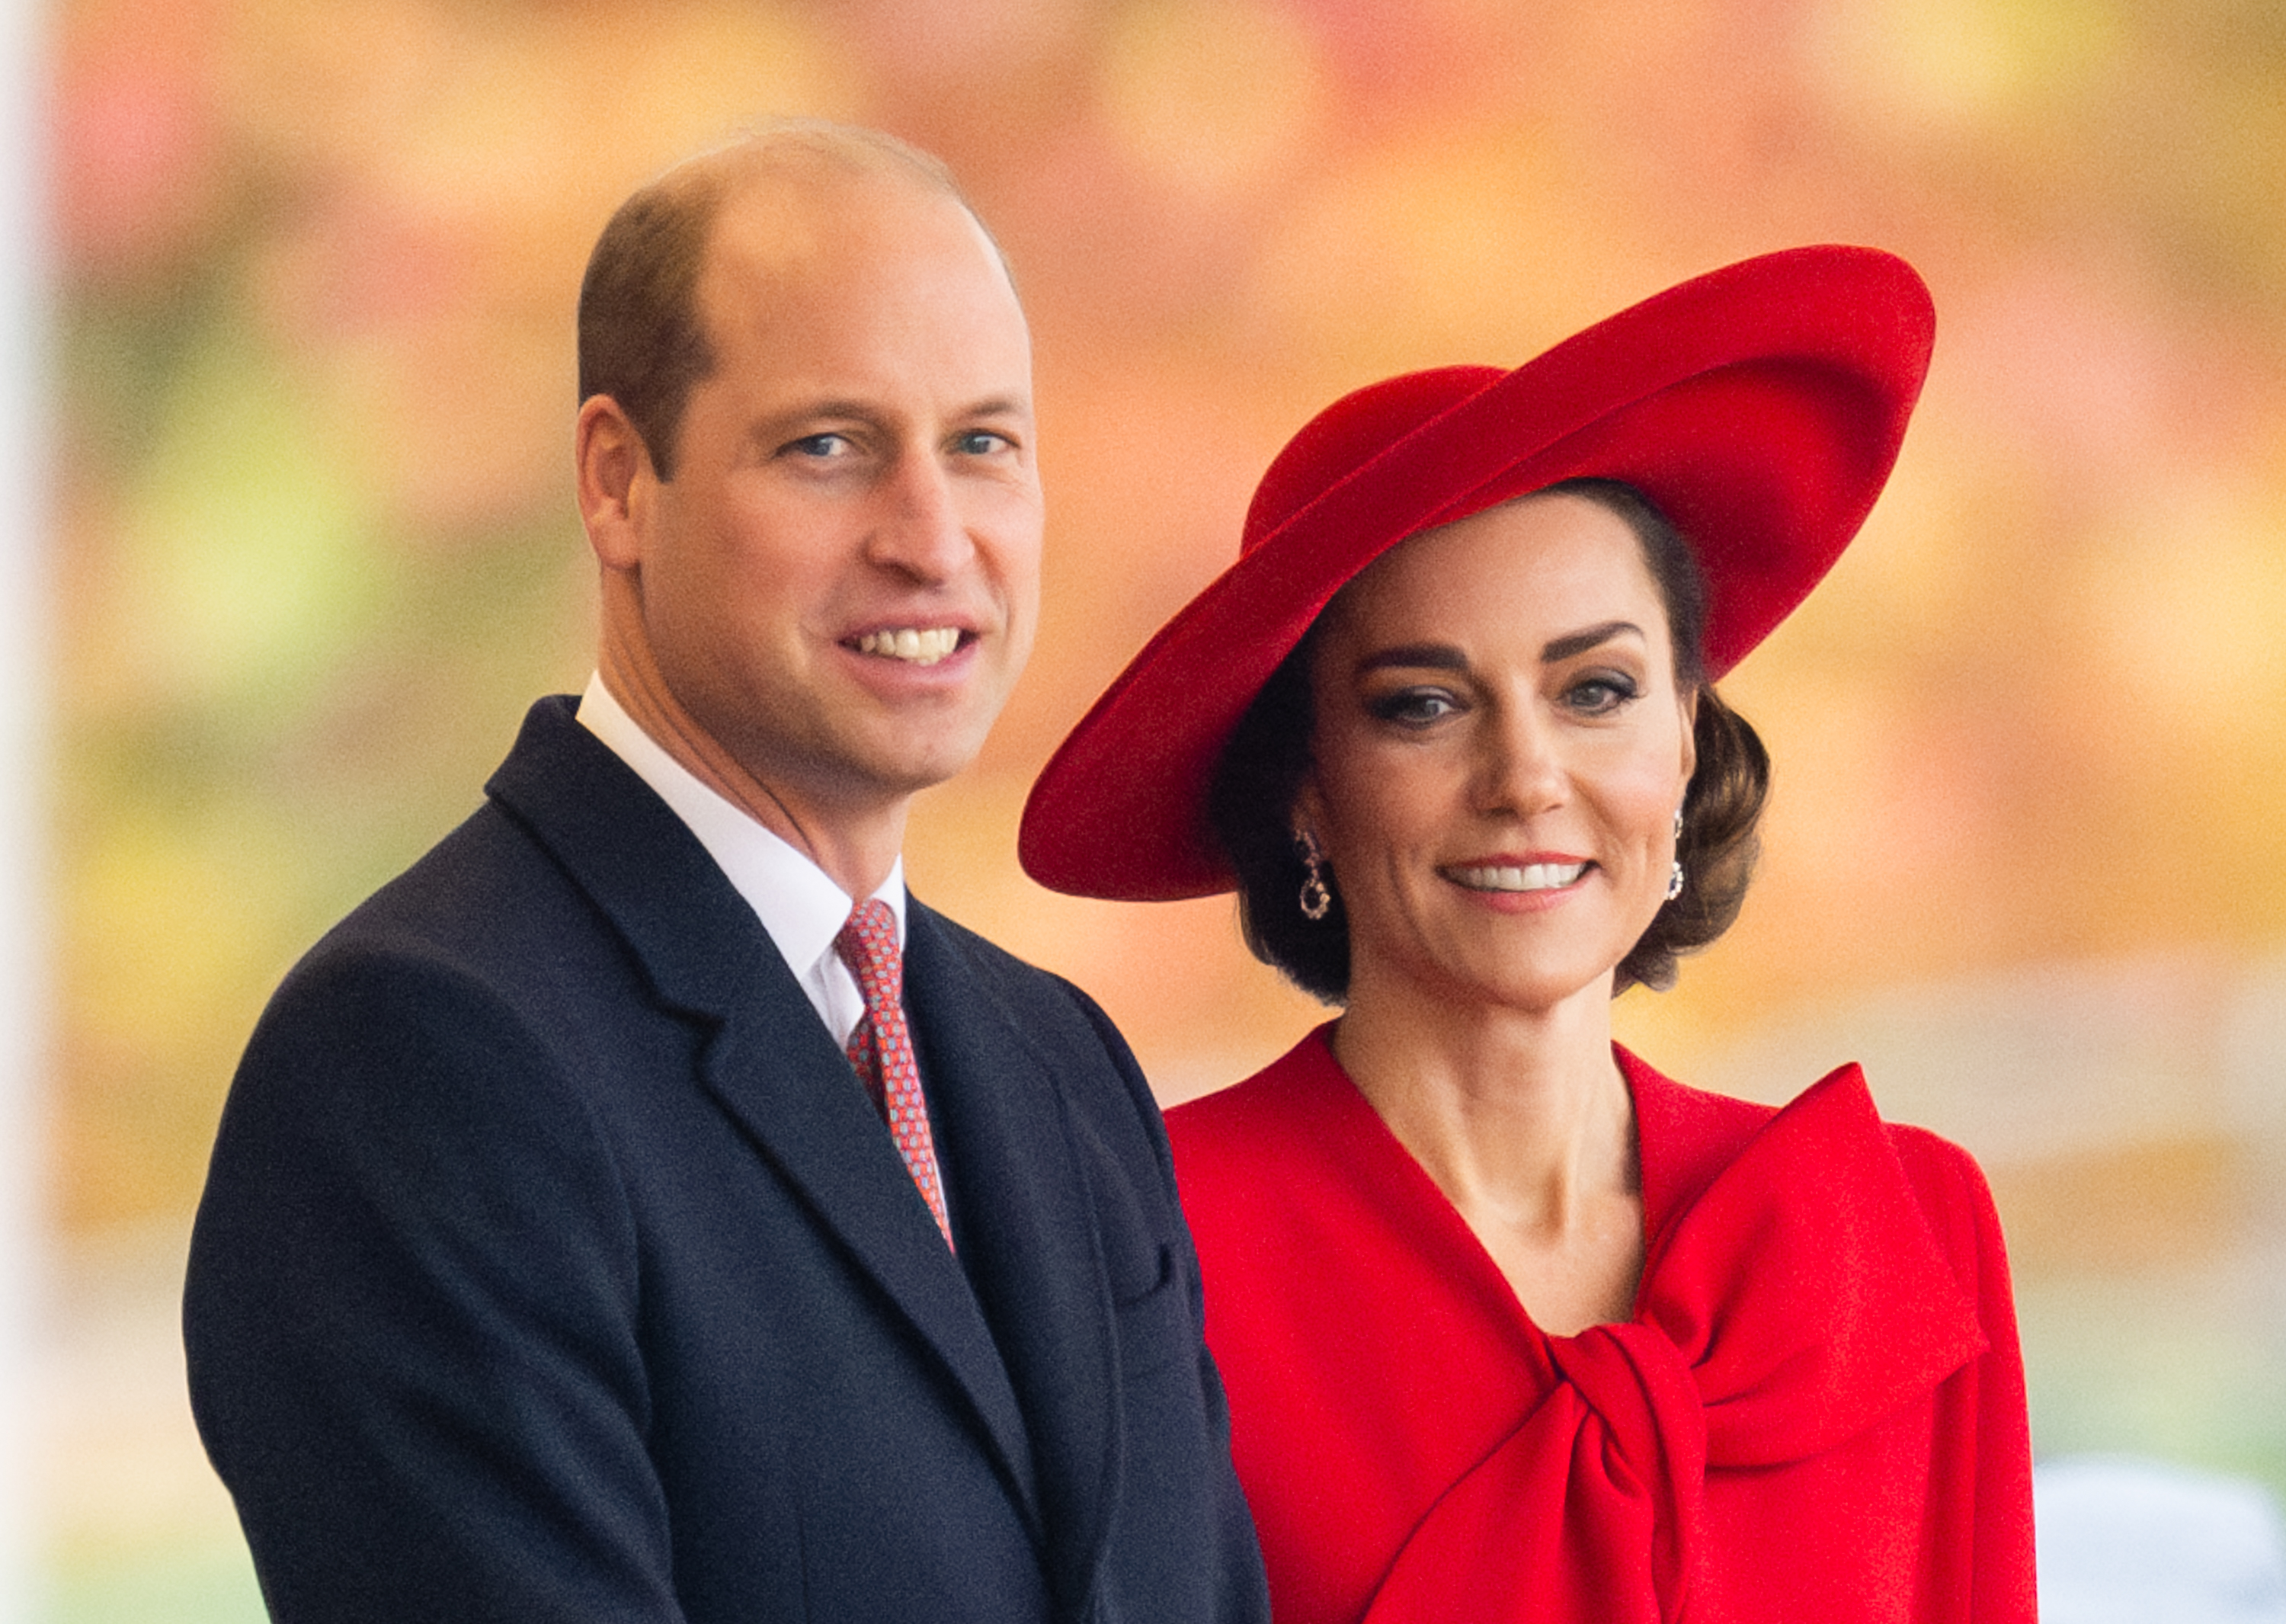 Prince William and Kate Middleton in formal attire, Kate in a red hat and matching outfit